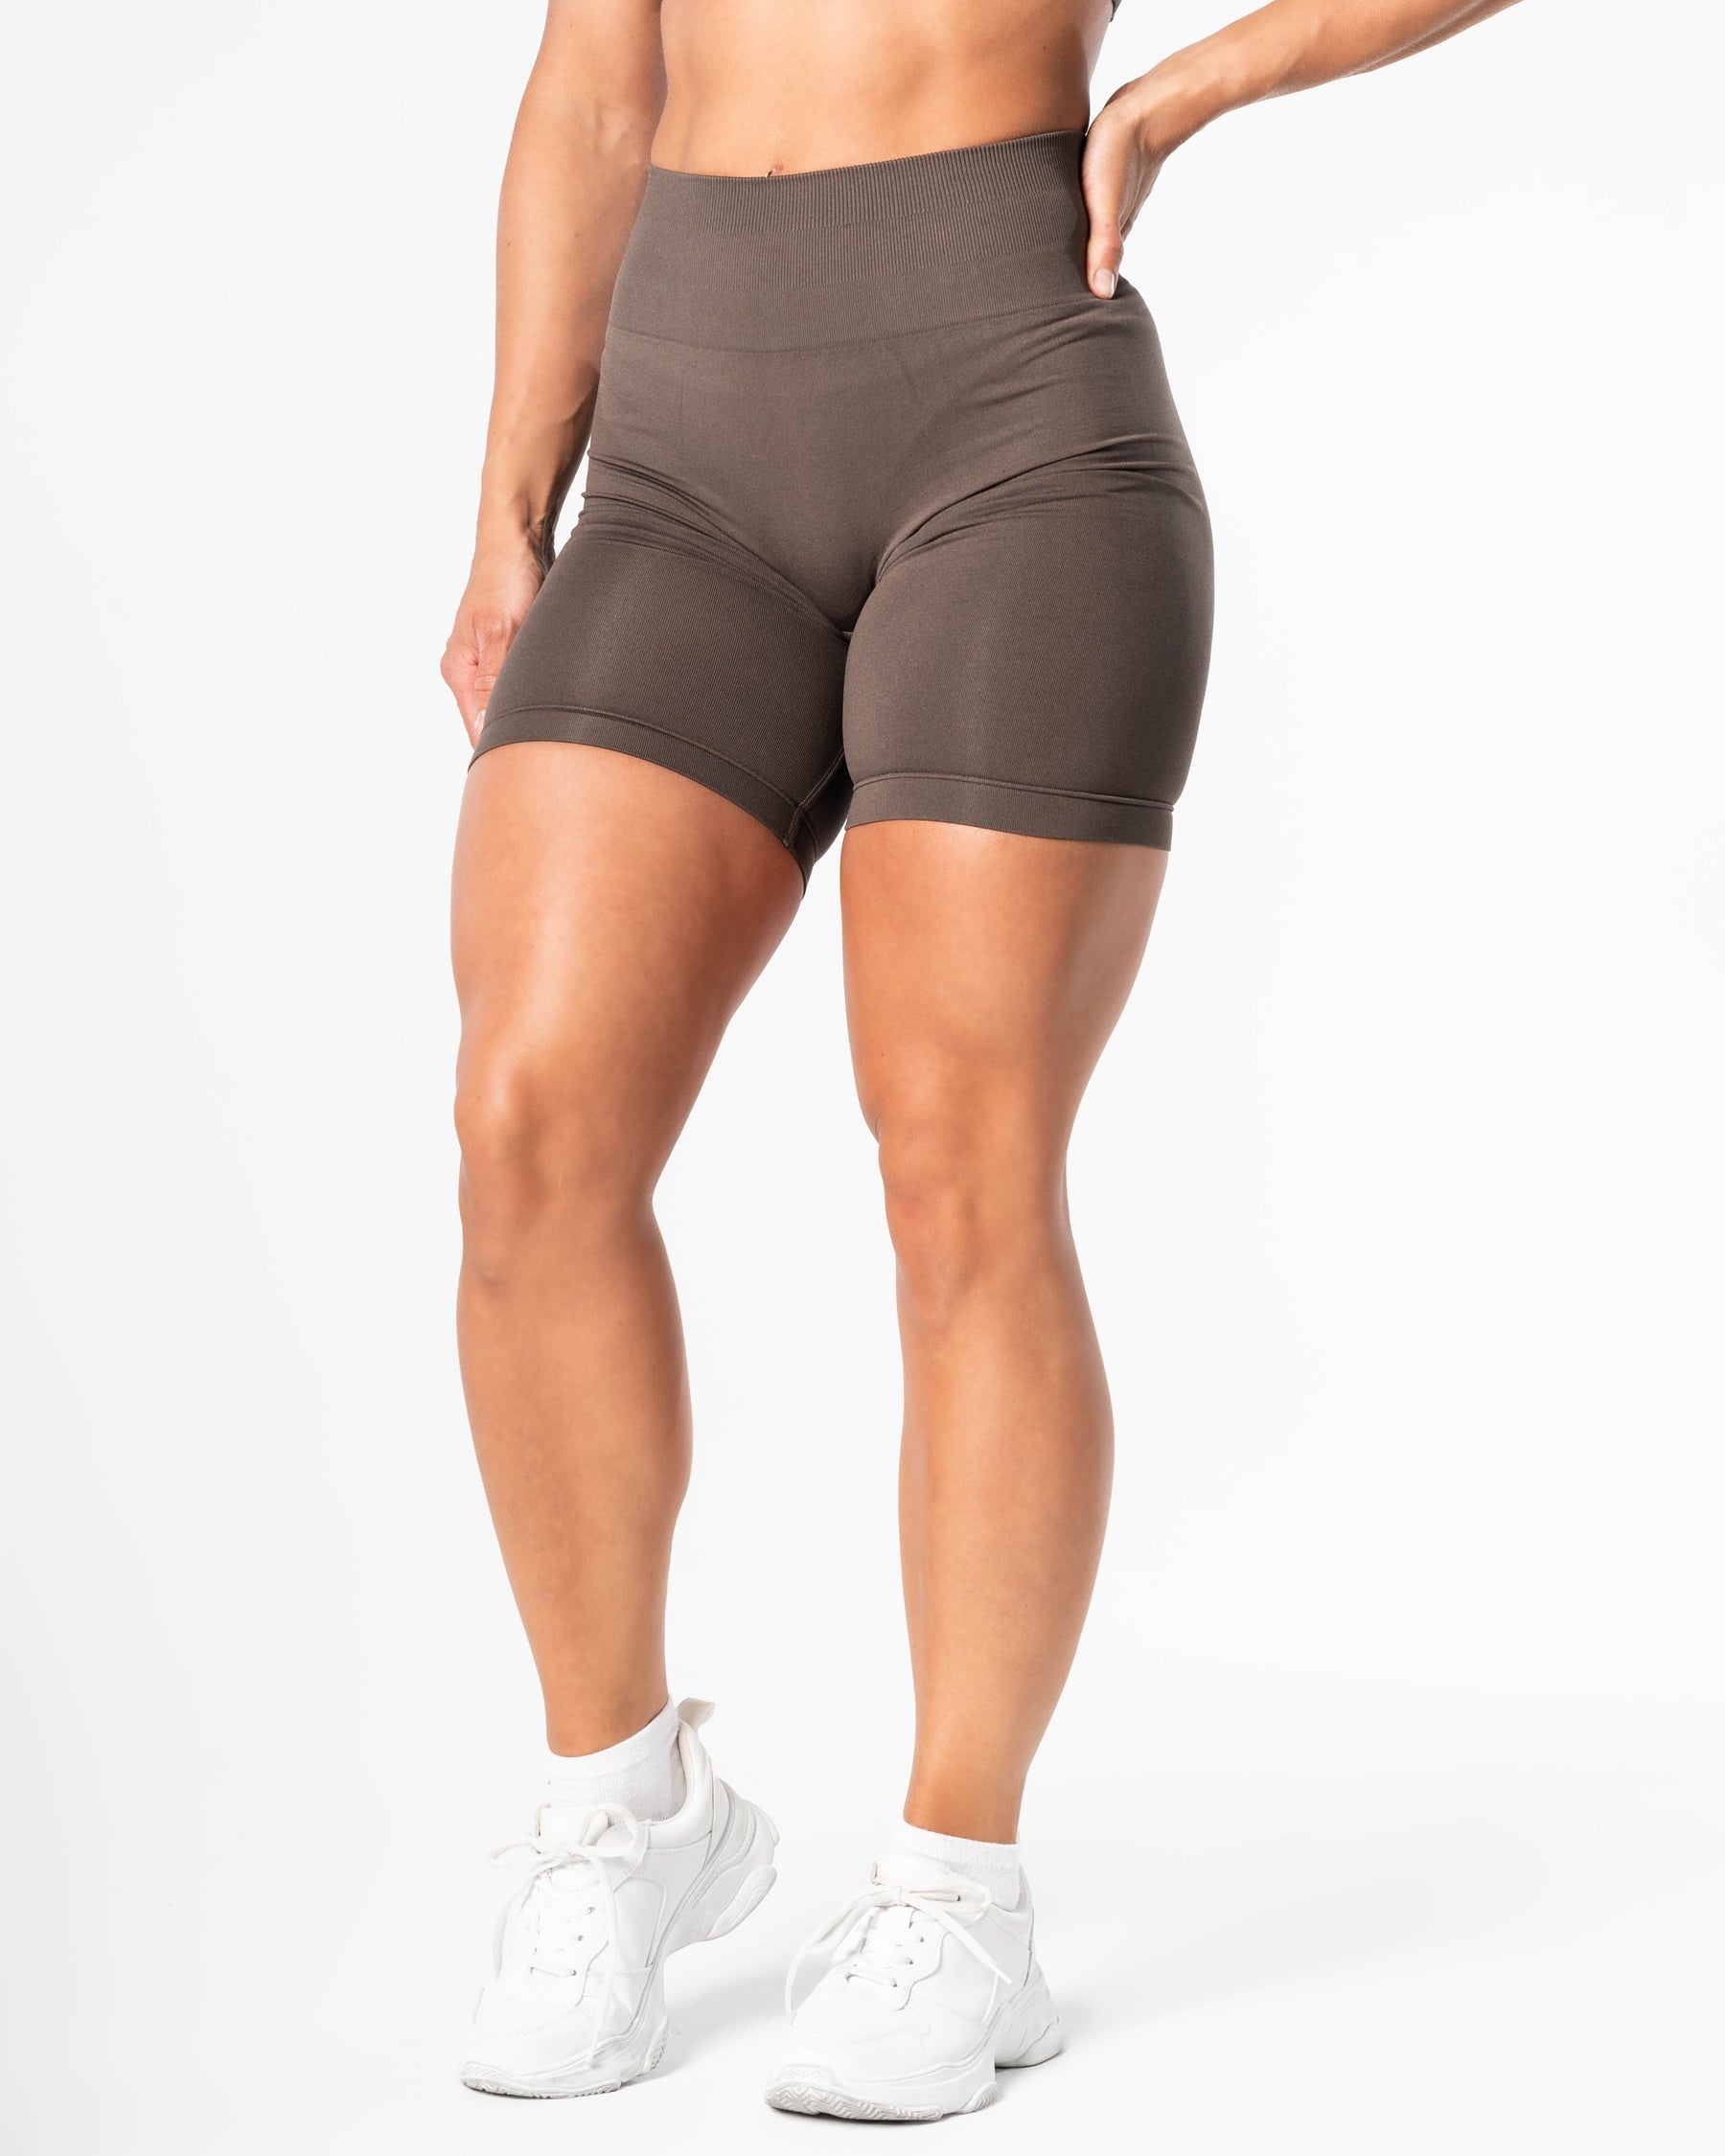 Prime Scrunch Shorts - Brown - RELODE